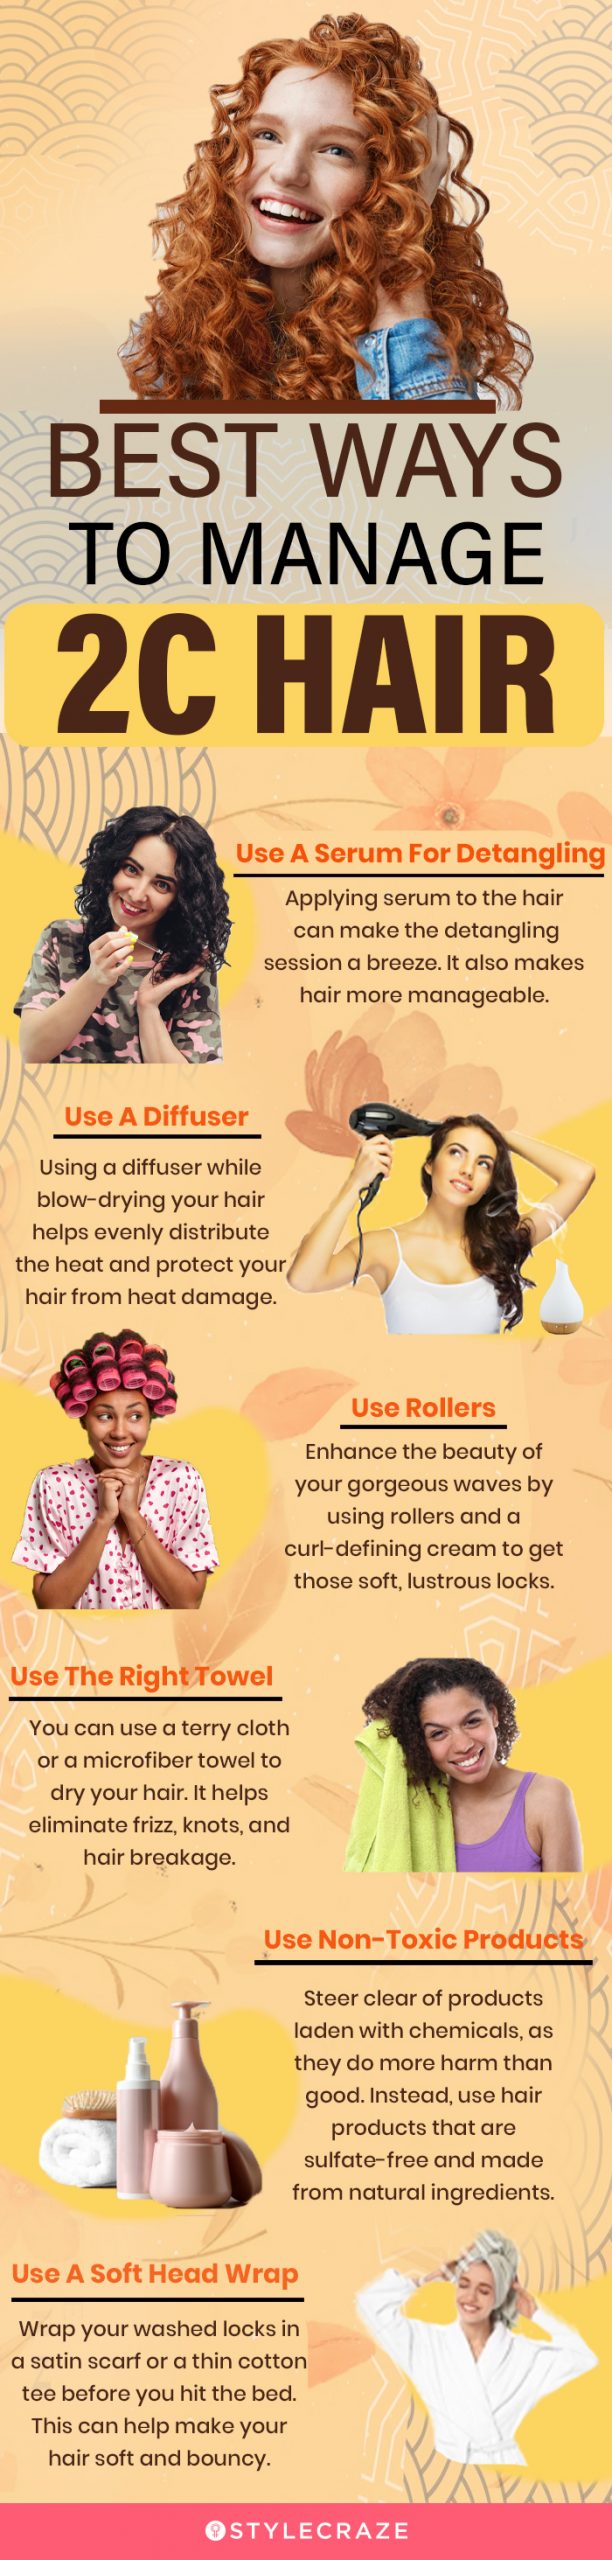 best ways to manage 2c hair (infographic)